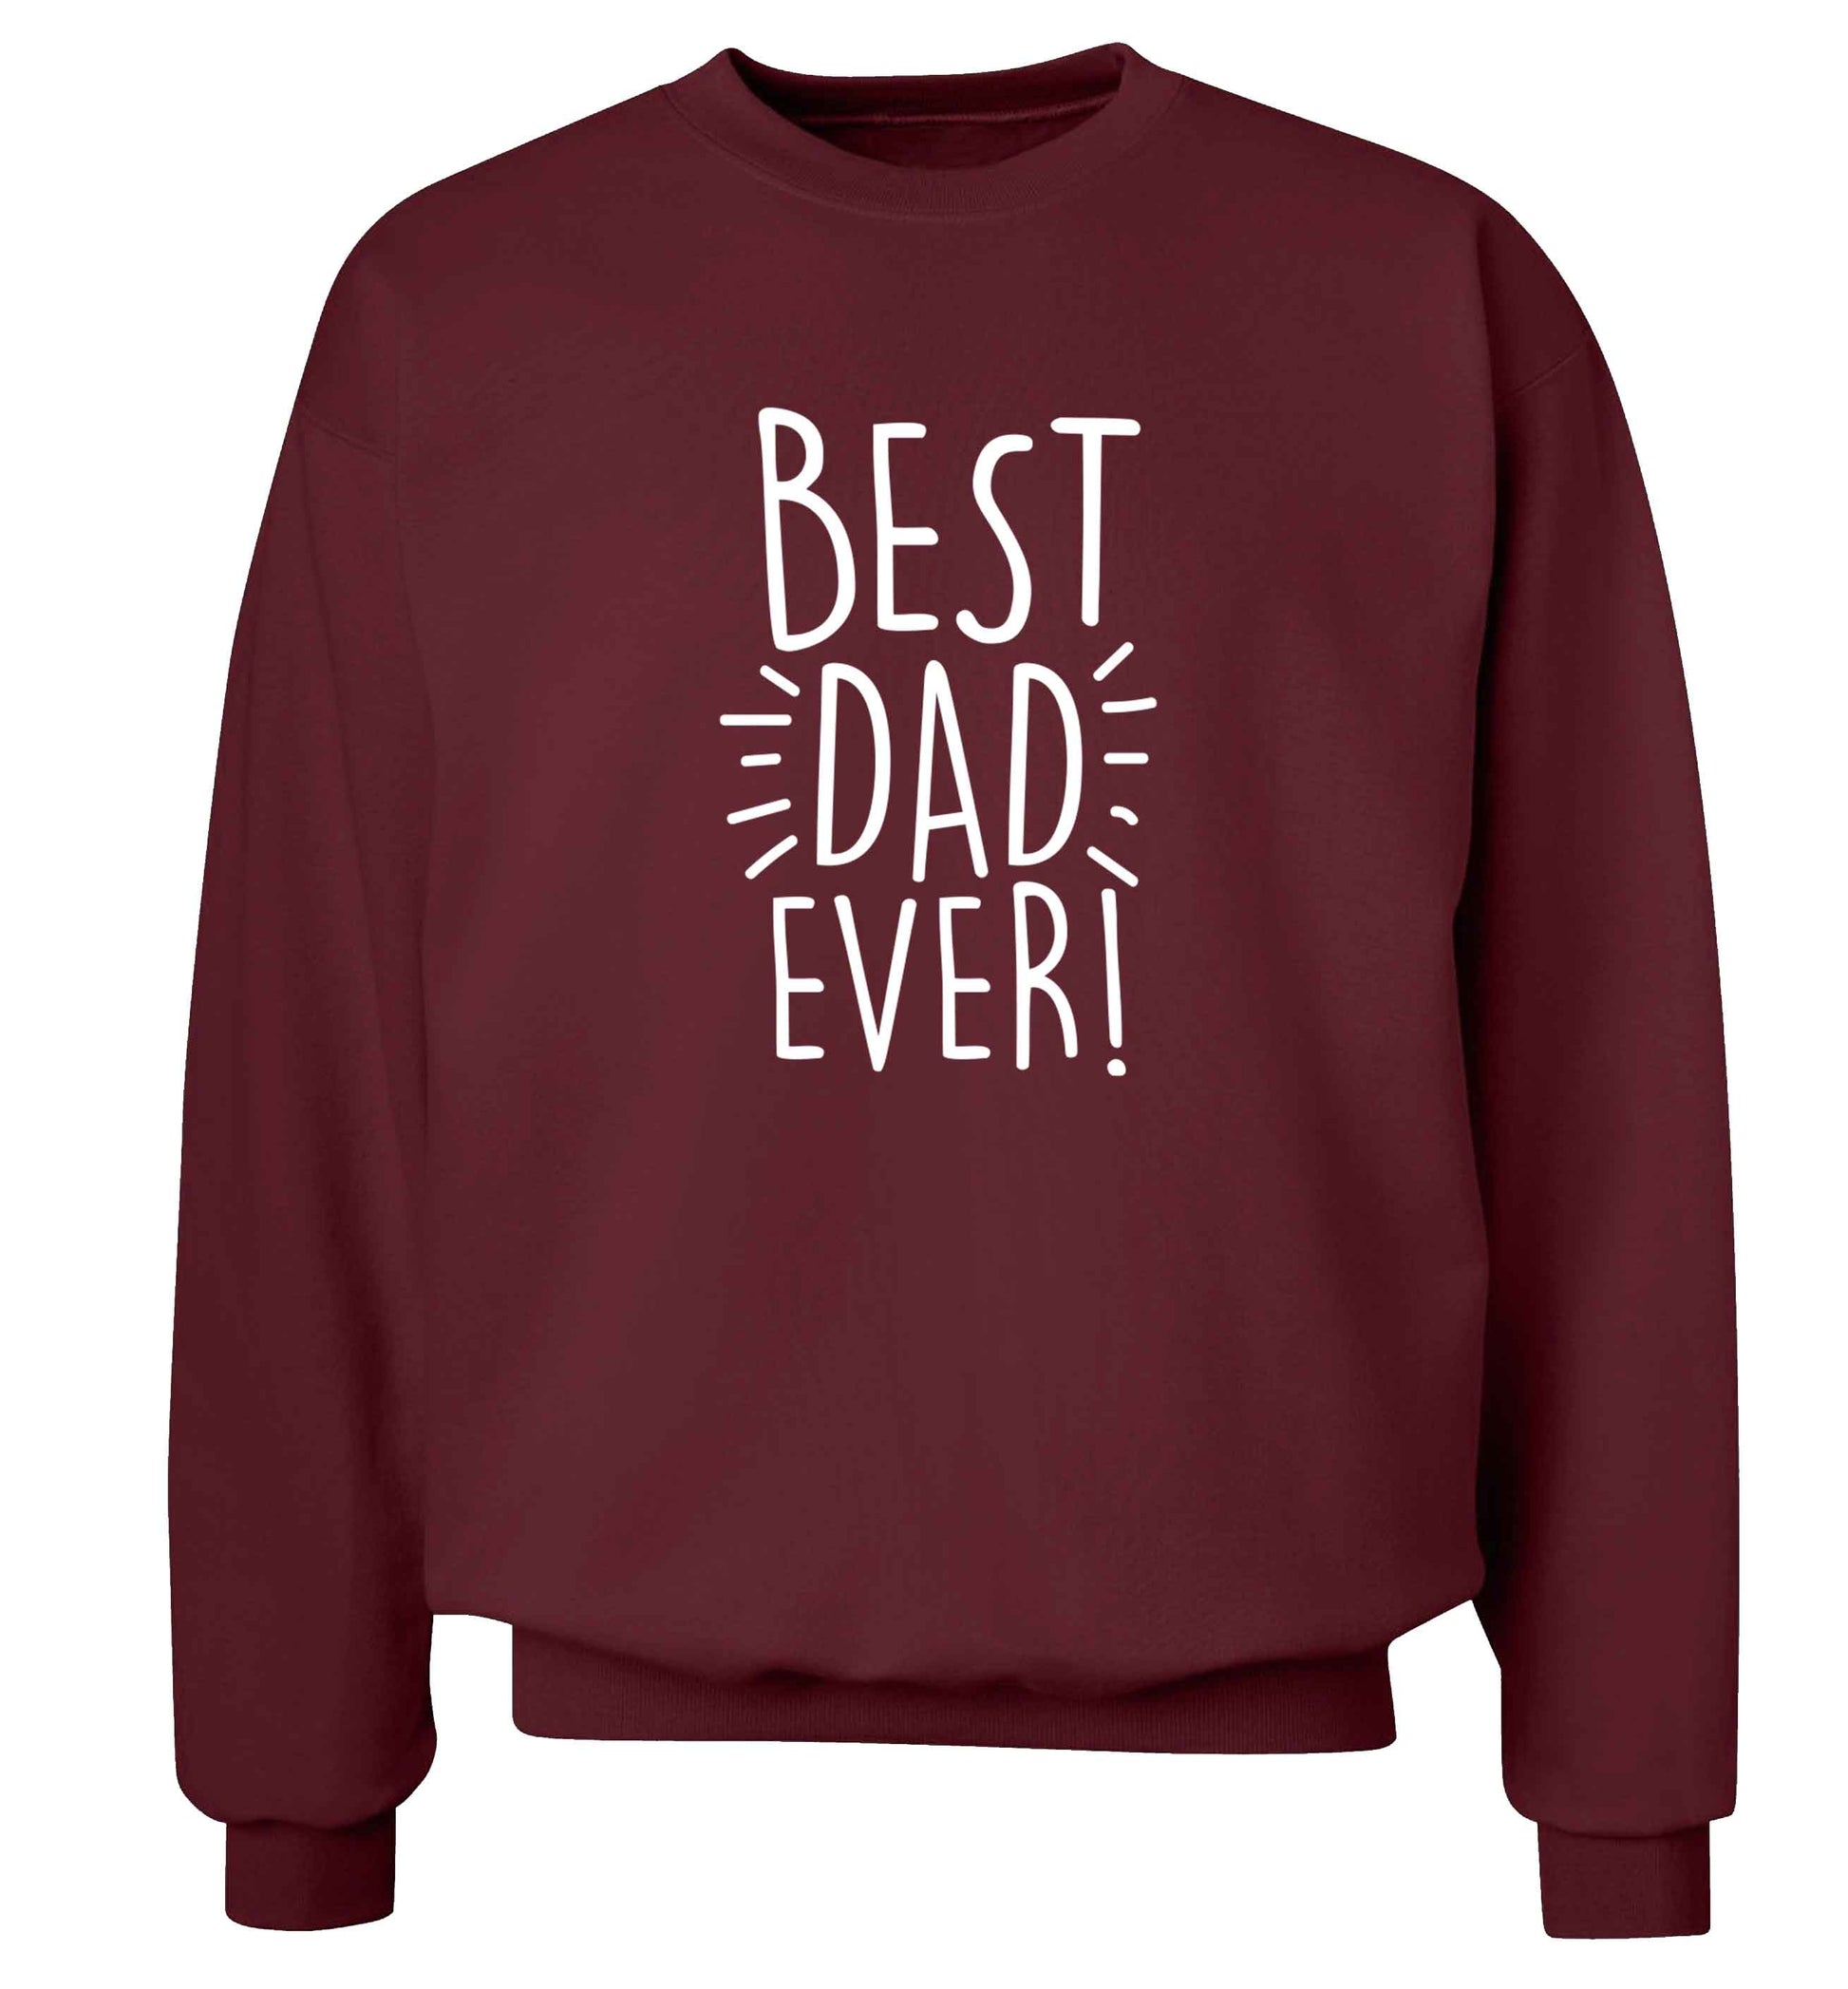 Best dad ever! adult's unisex maroon sweater 2XL